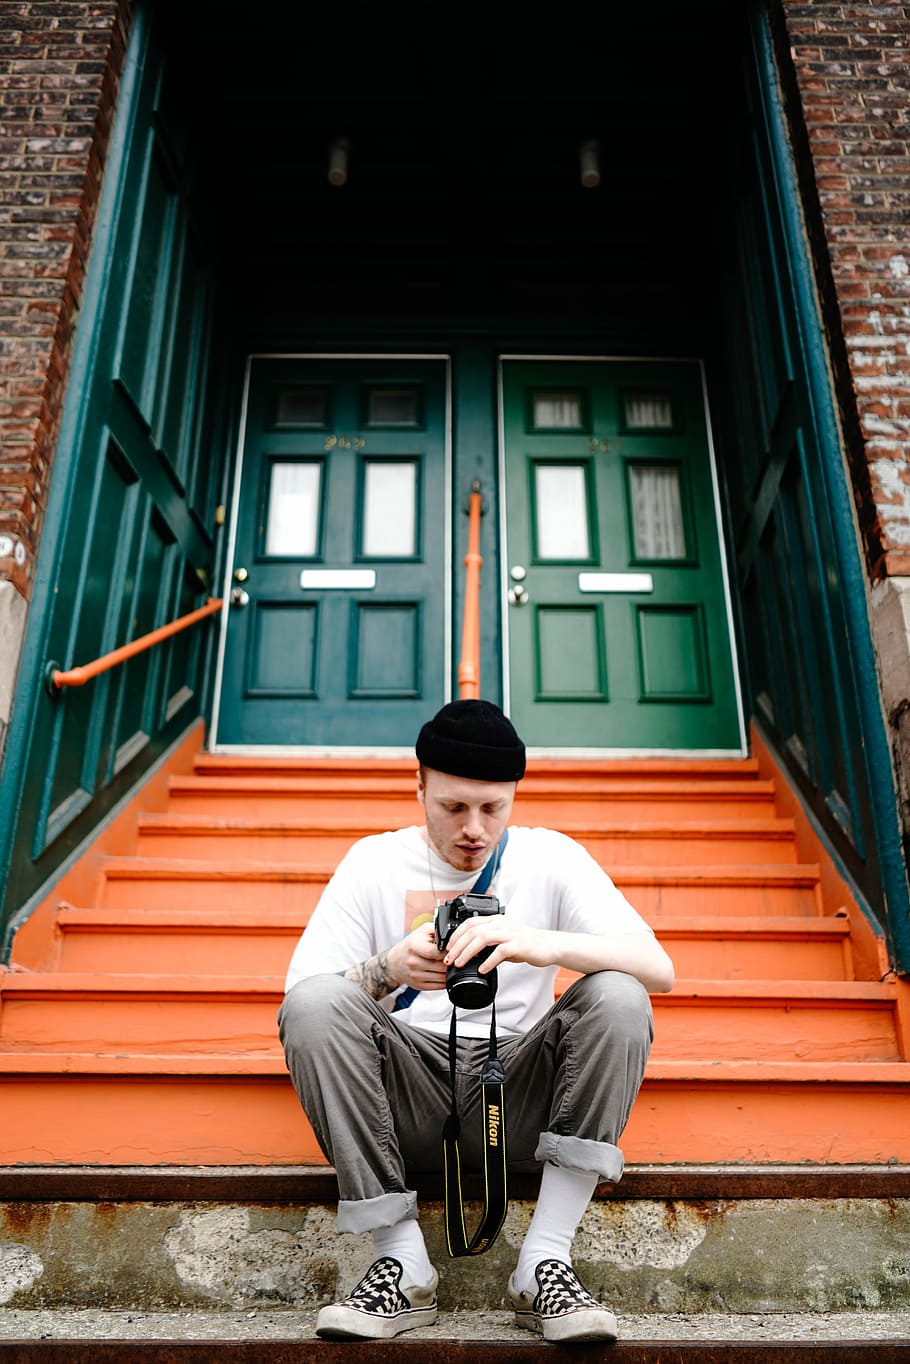 man seating in front of stair while holding DSLR camera, man sitting on stairs in front of green doors during daytime